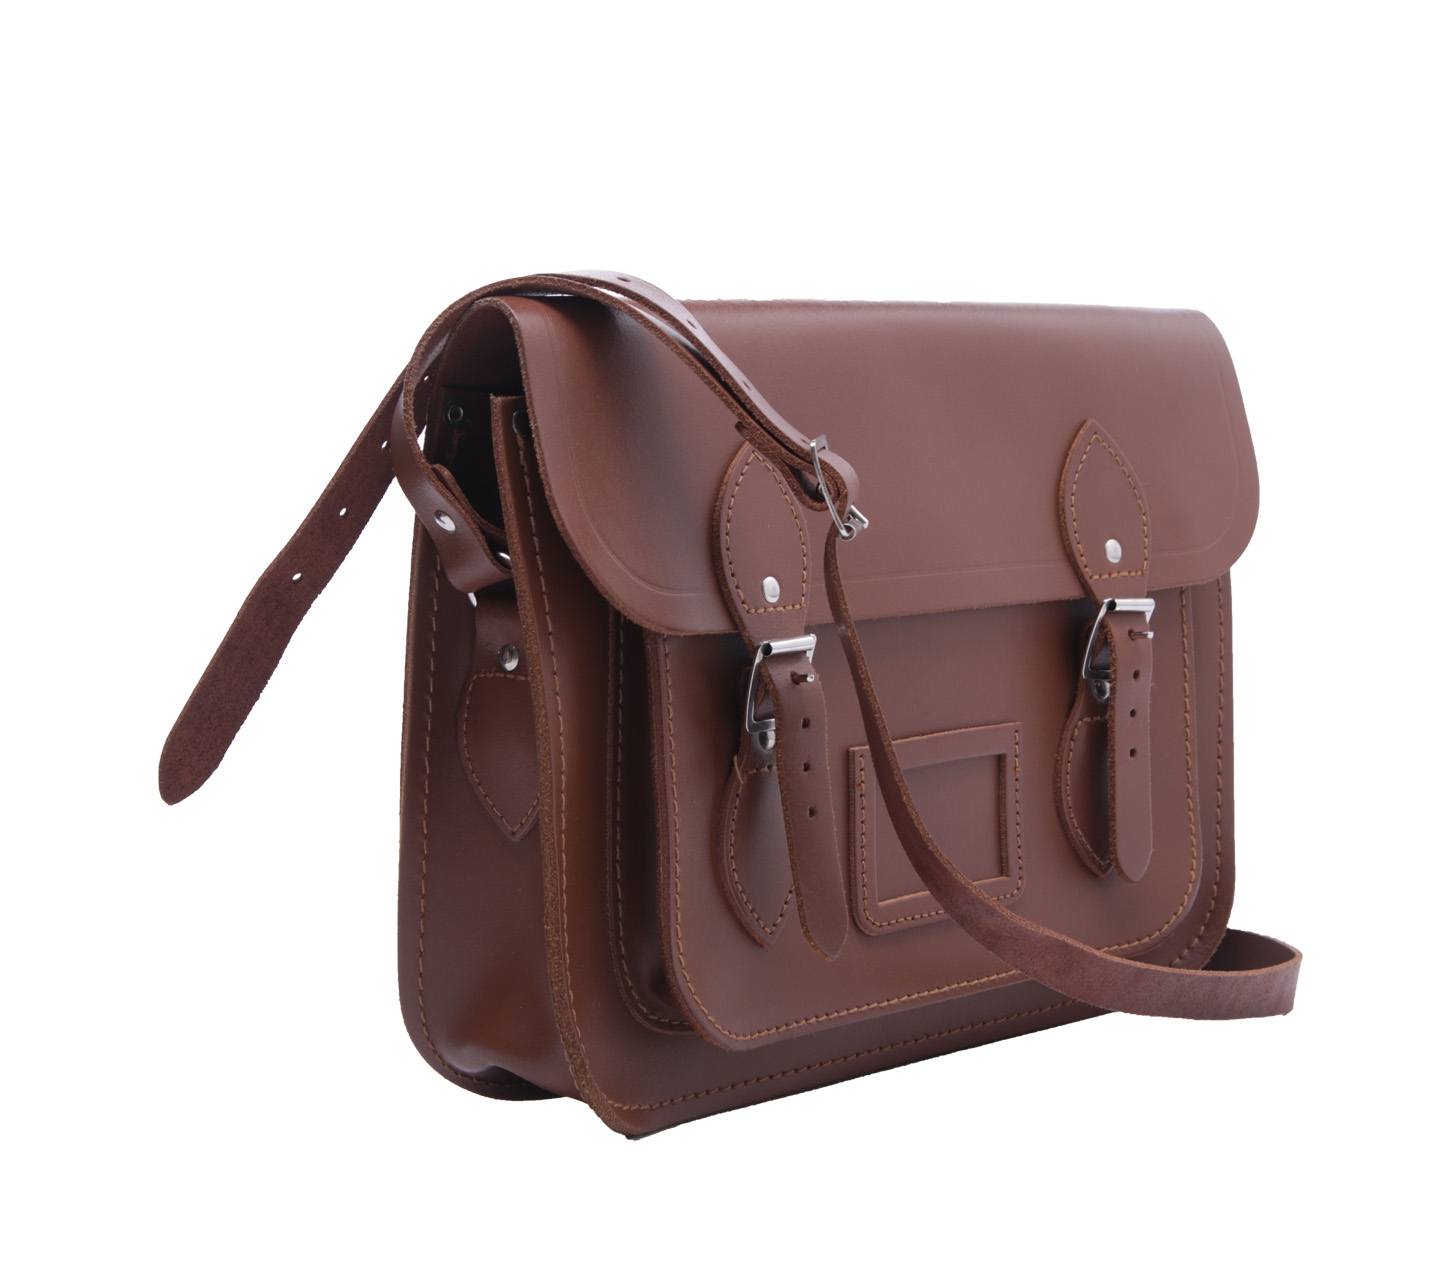 The Cambridge Satchel Company Brown Leather Sling Bag